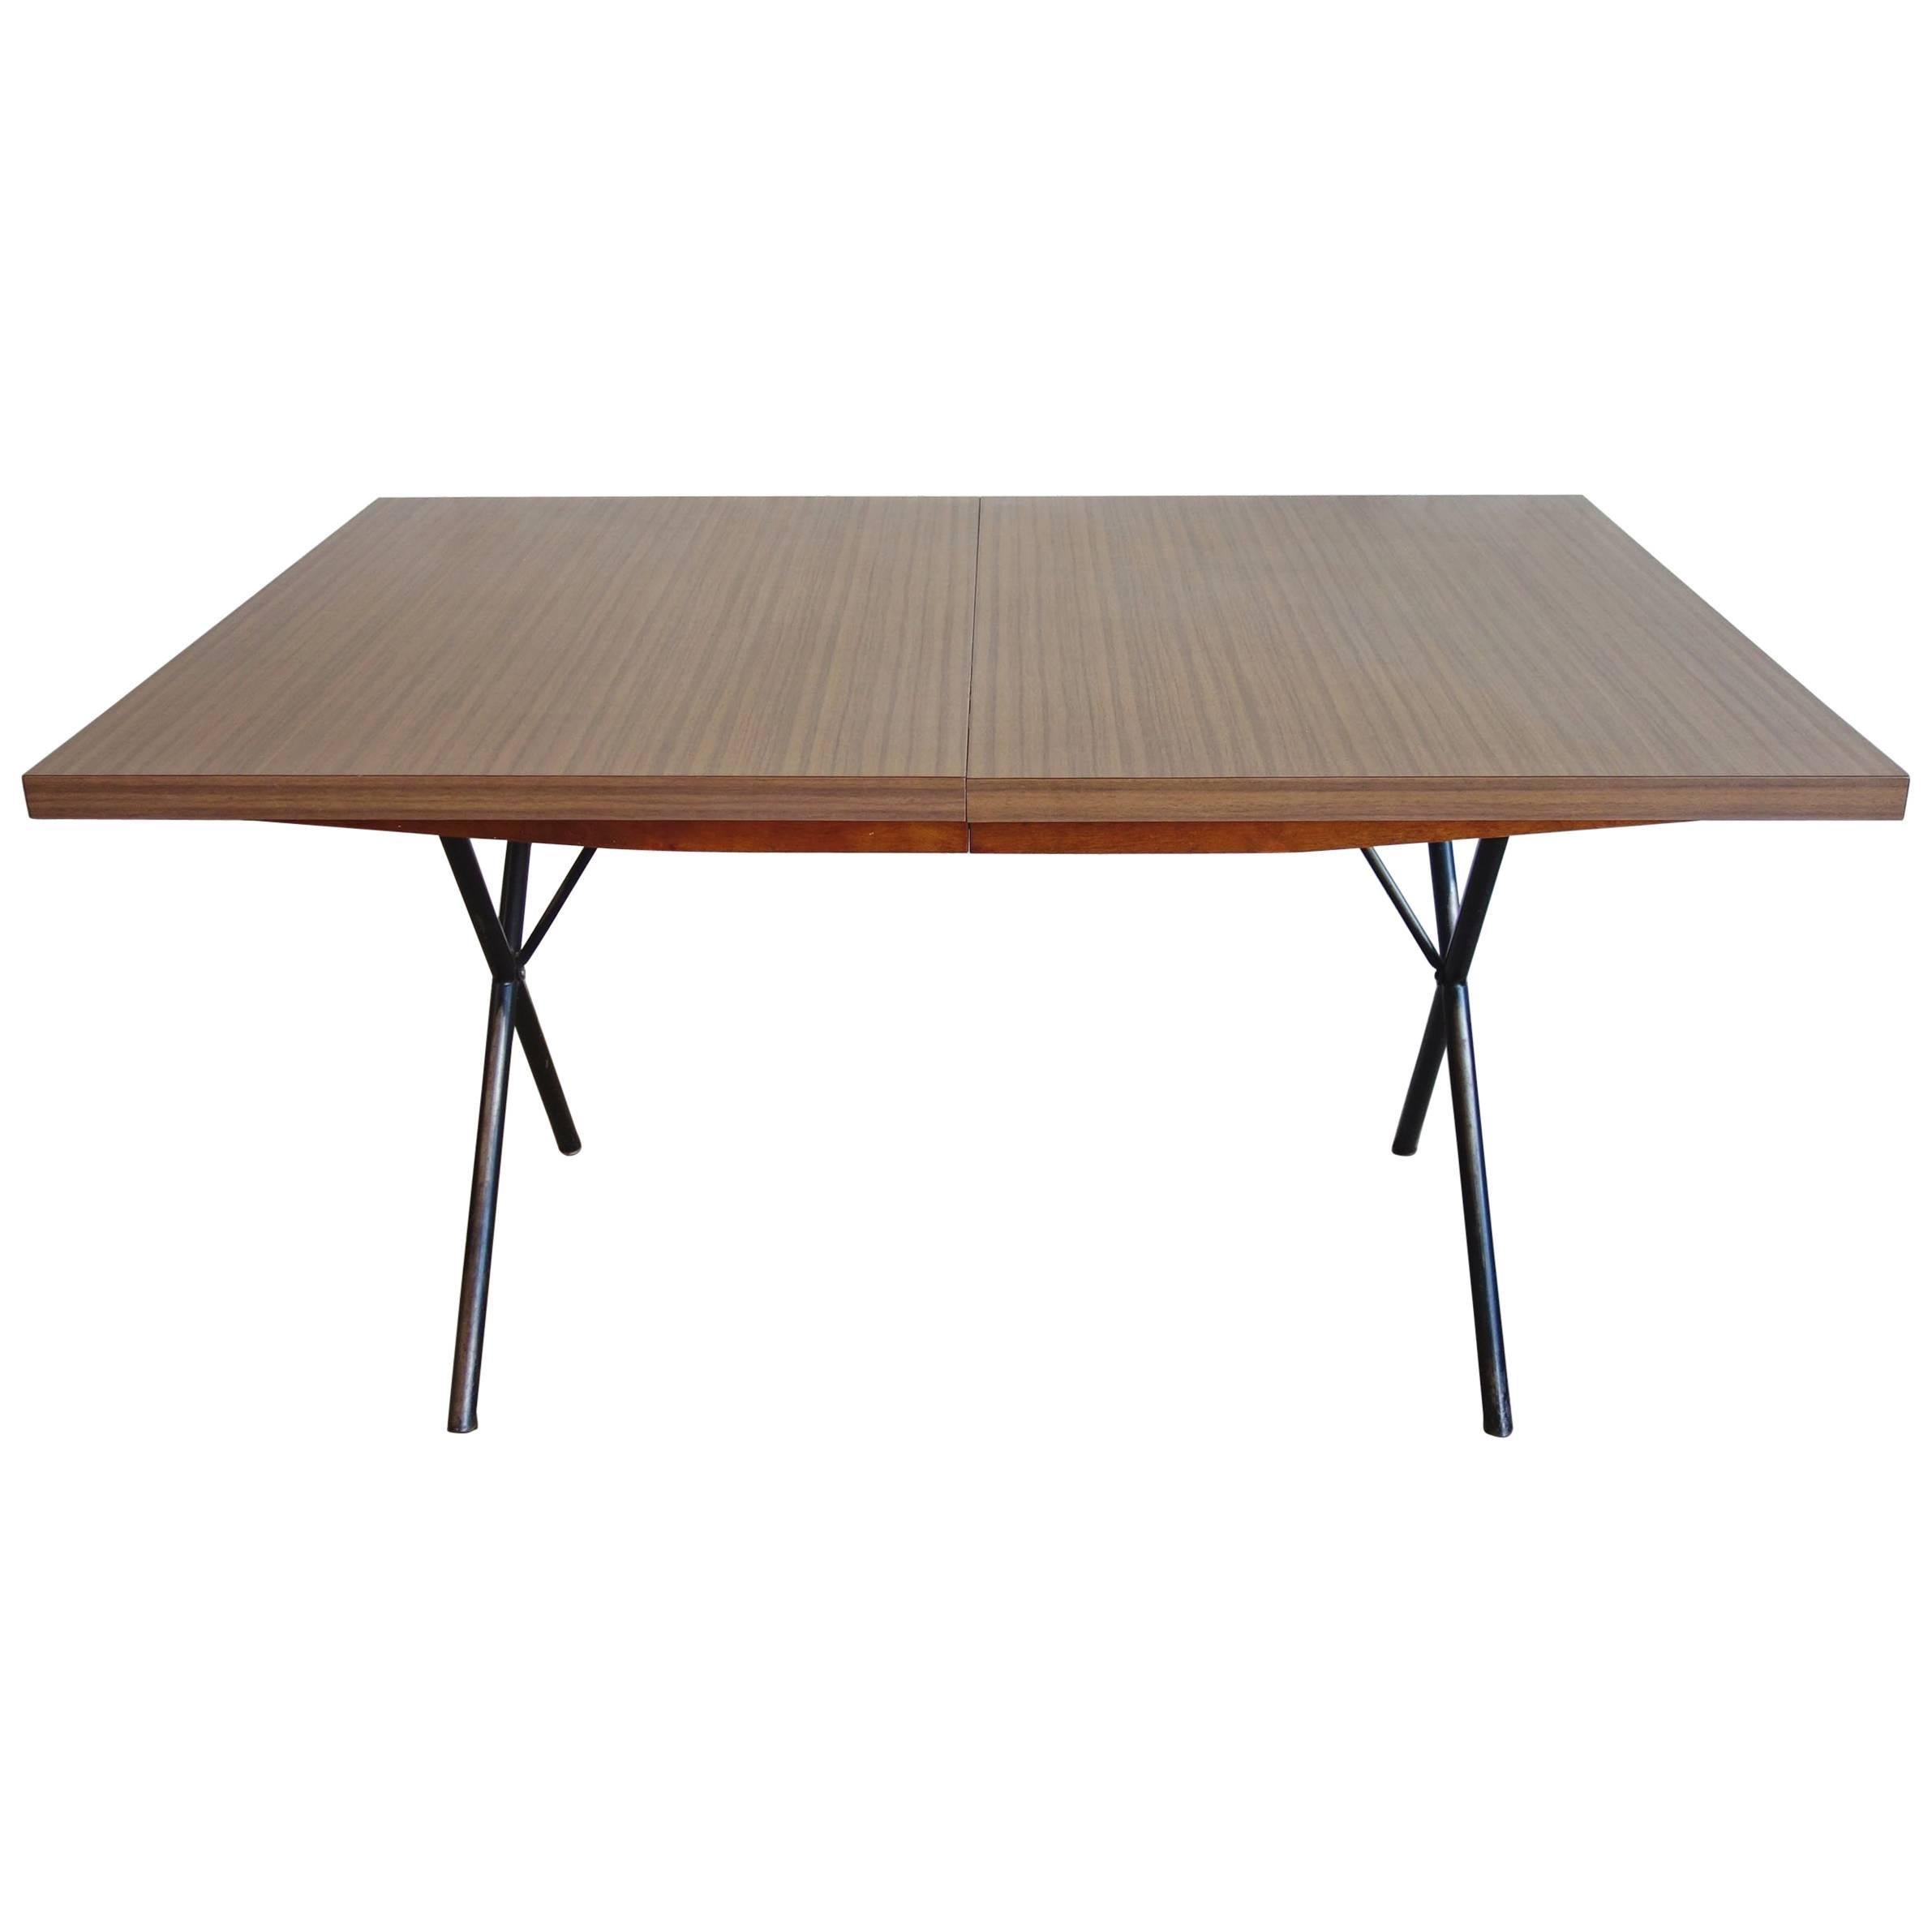 Early Mid-Century George Nelson for Herman Miller X-Leg Dining Table